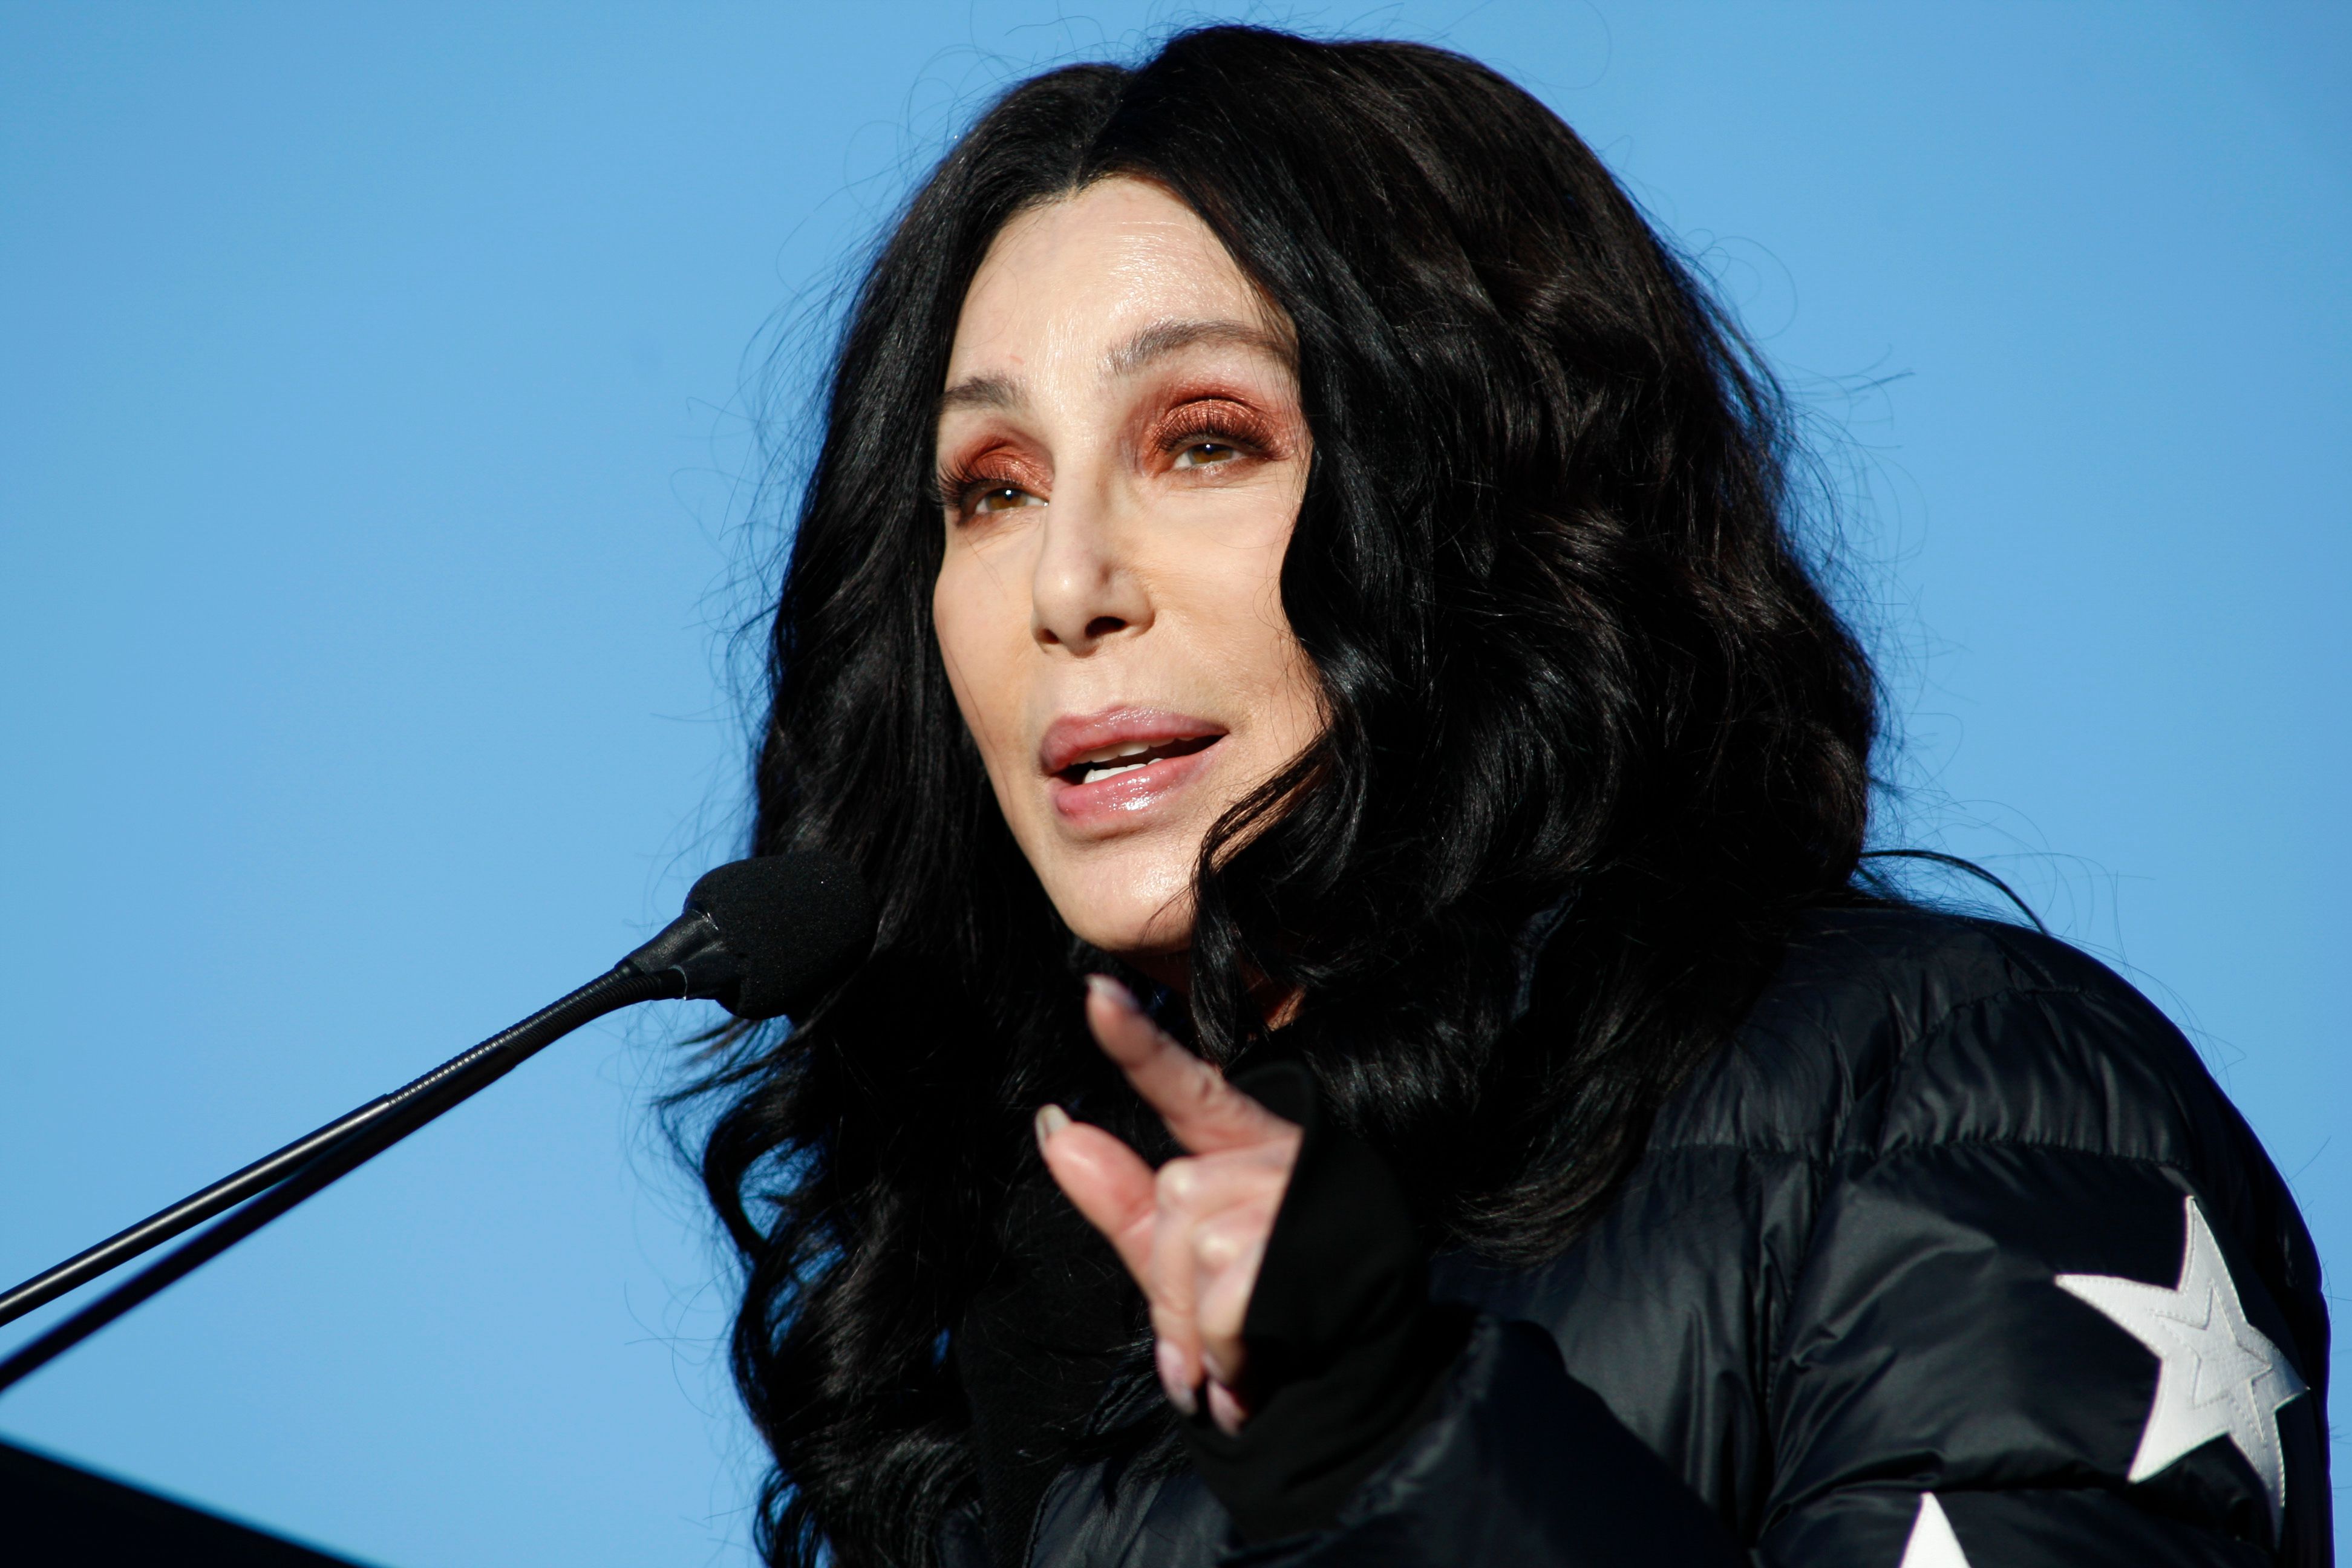 Singer/Actress Cher speaks at the Women's March "Power to the Polls" voter registration tour launch at Sam Boyd Stadium on January 21, 2018 | Photo: Getty Images